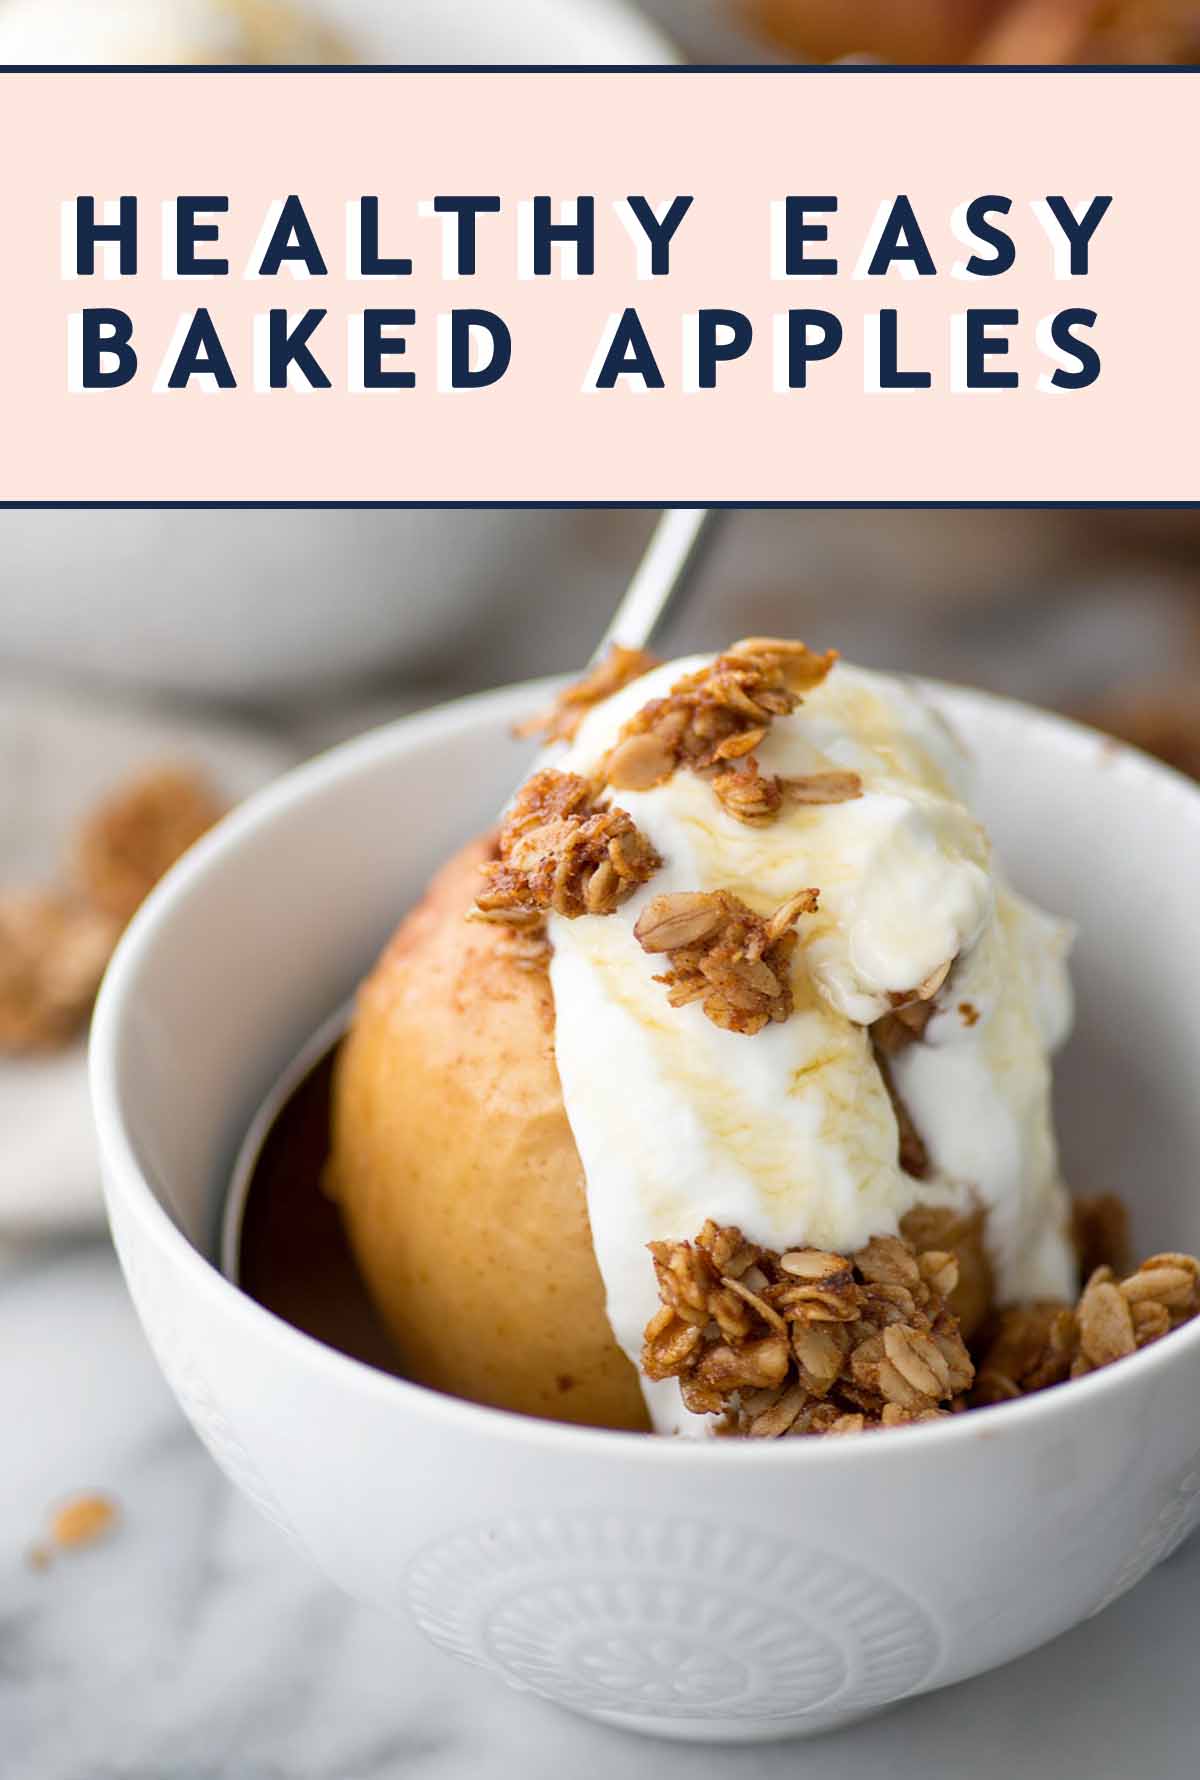 photo of a stuffed baked apple recipe with text header